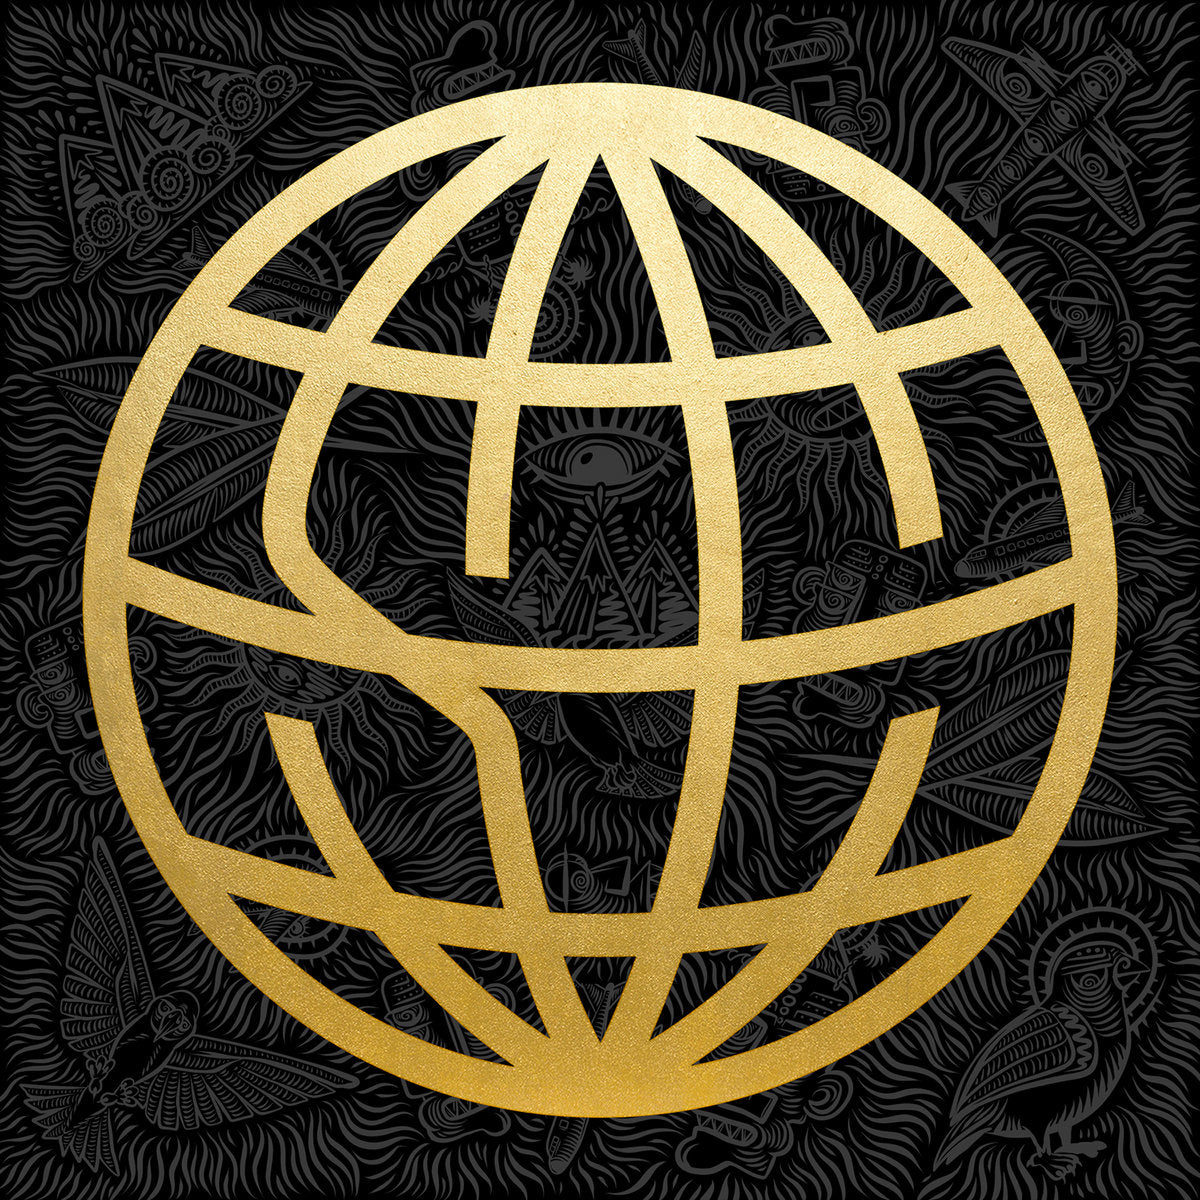 State Champs "Around The World And Back" CD